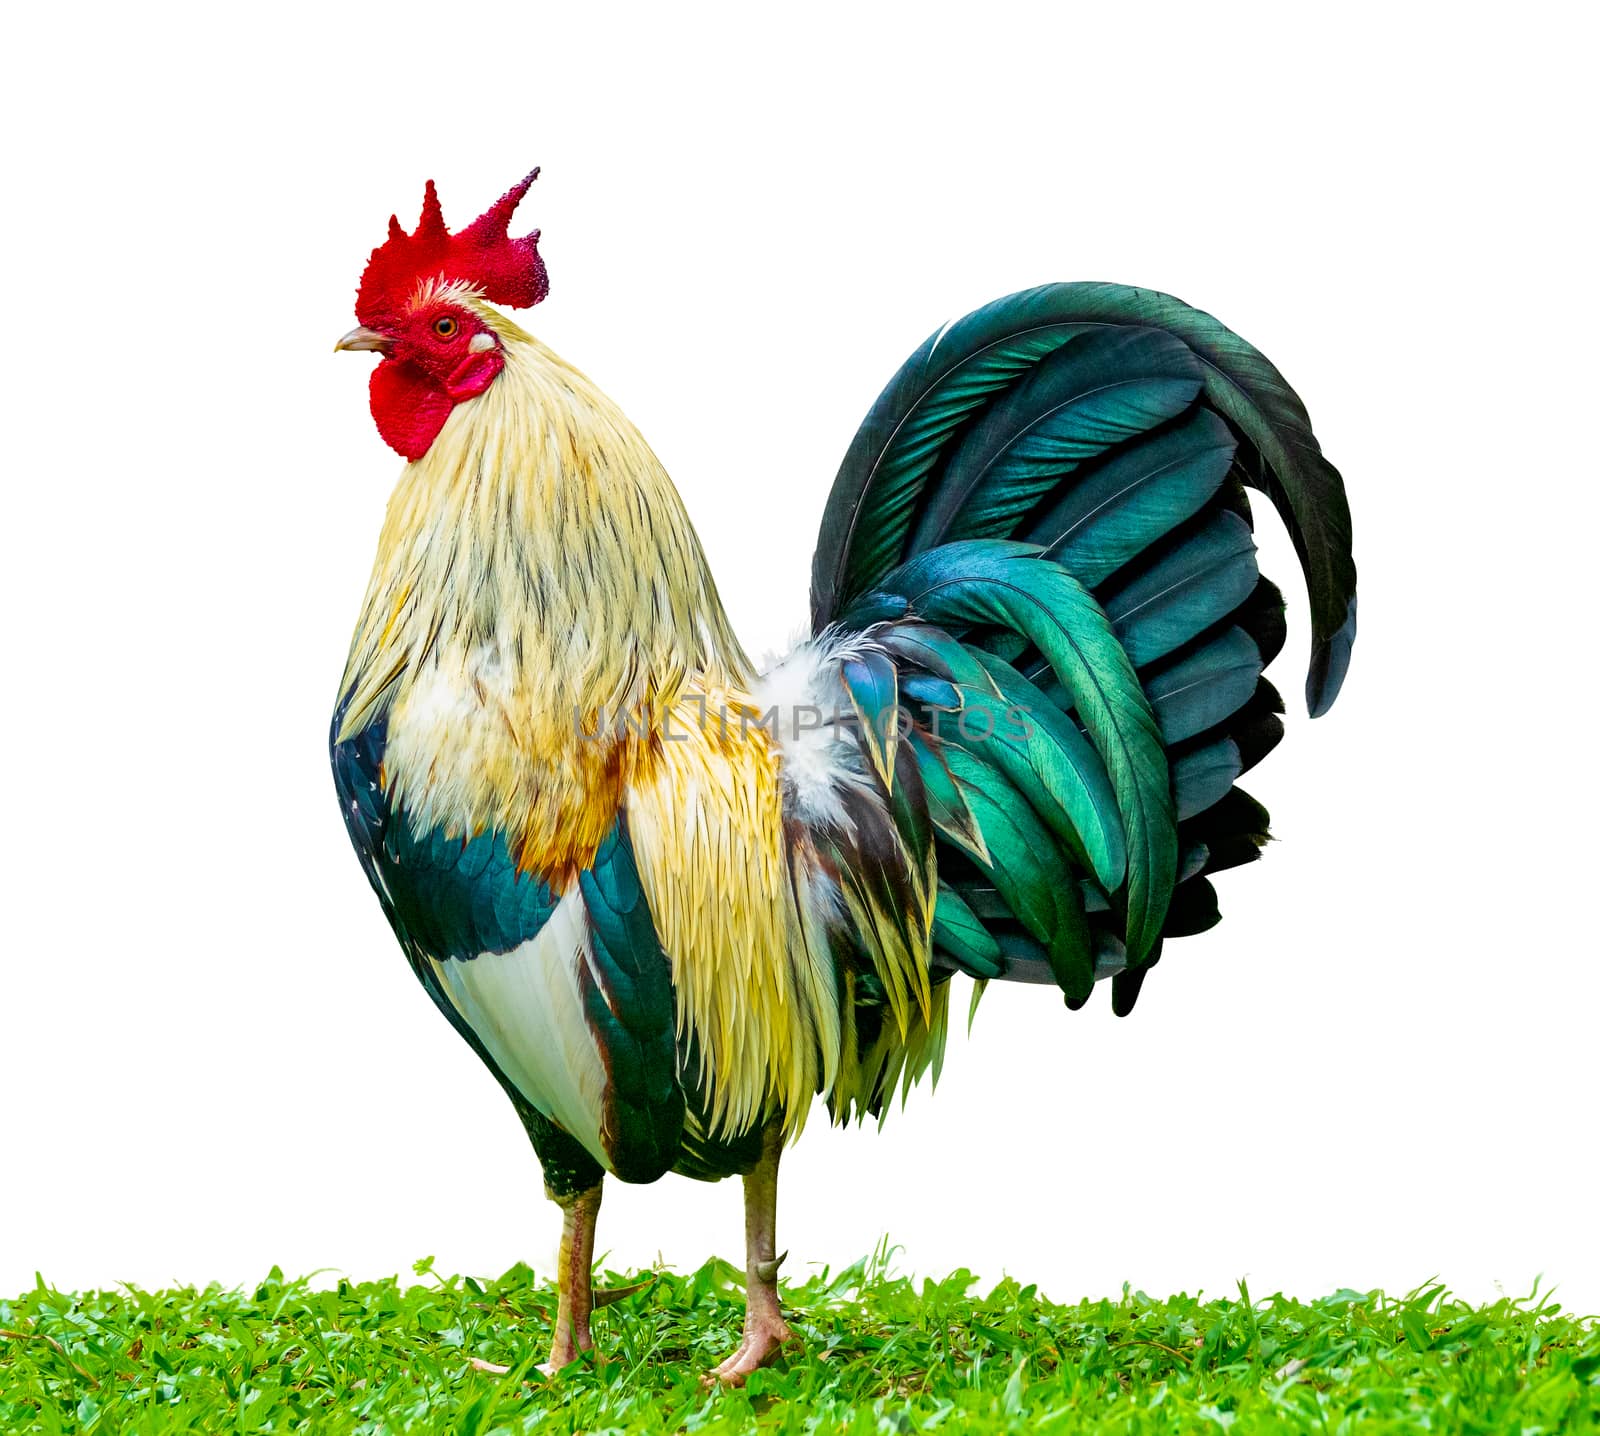 An Isolated Proud Rooster (Cockerel) Standing In The Grass Symbolising Pride And Masculinity